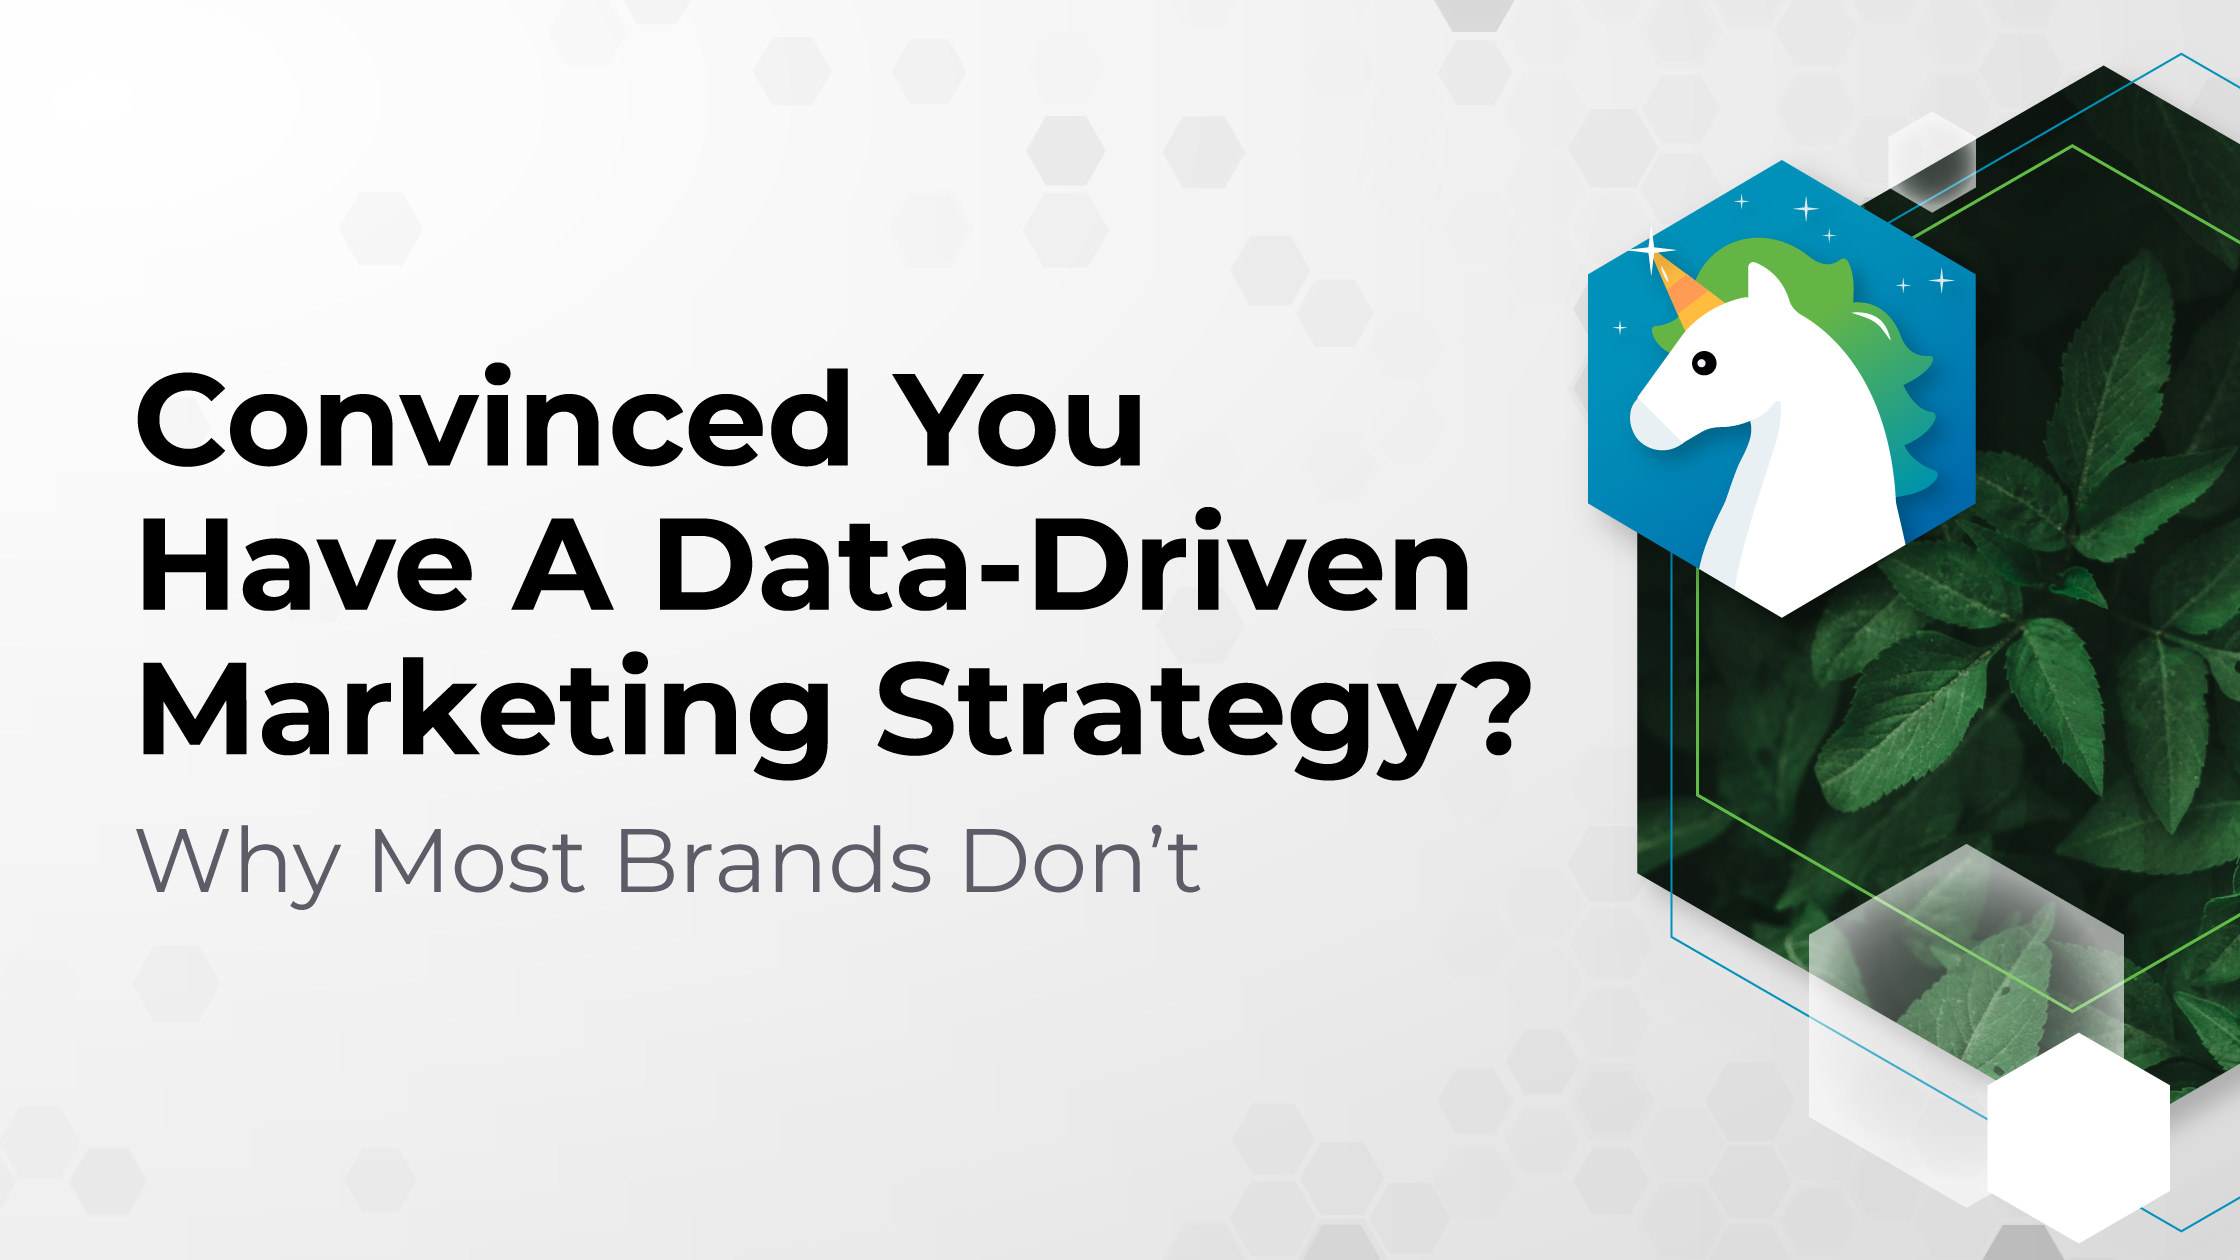 Convinced You Have A Data-Driven Marketing Strategy? Why Most Brands Don’t